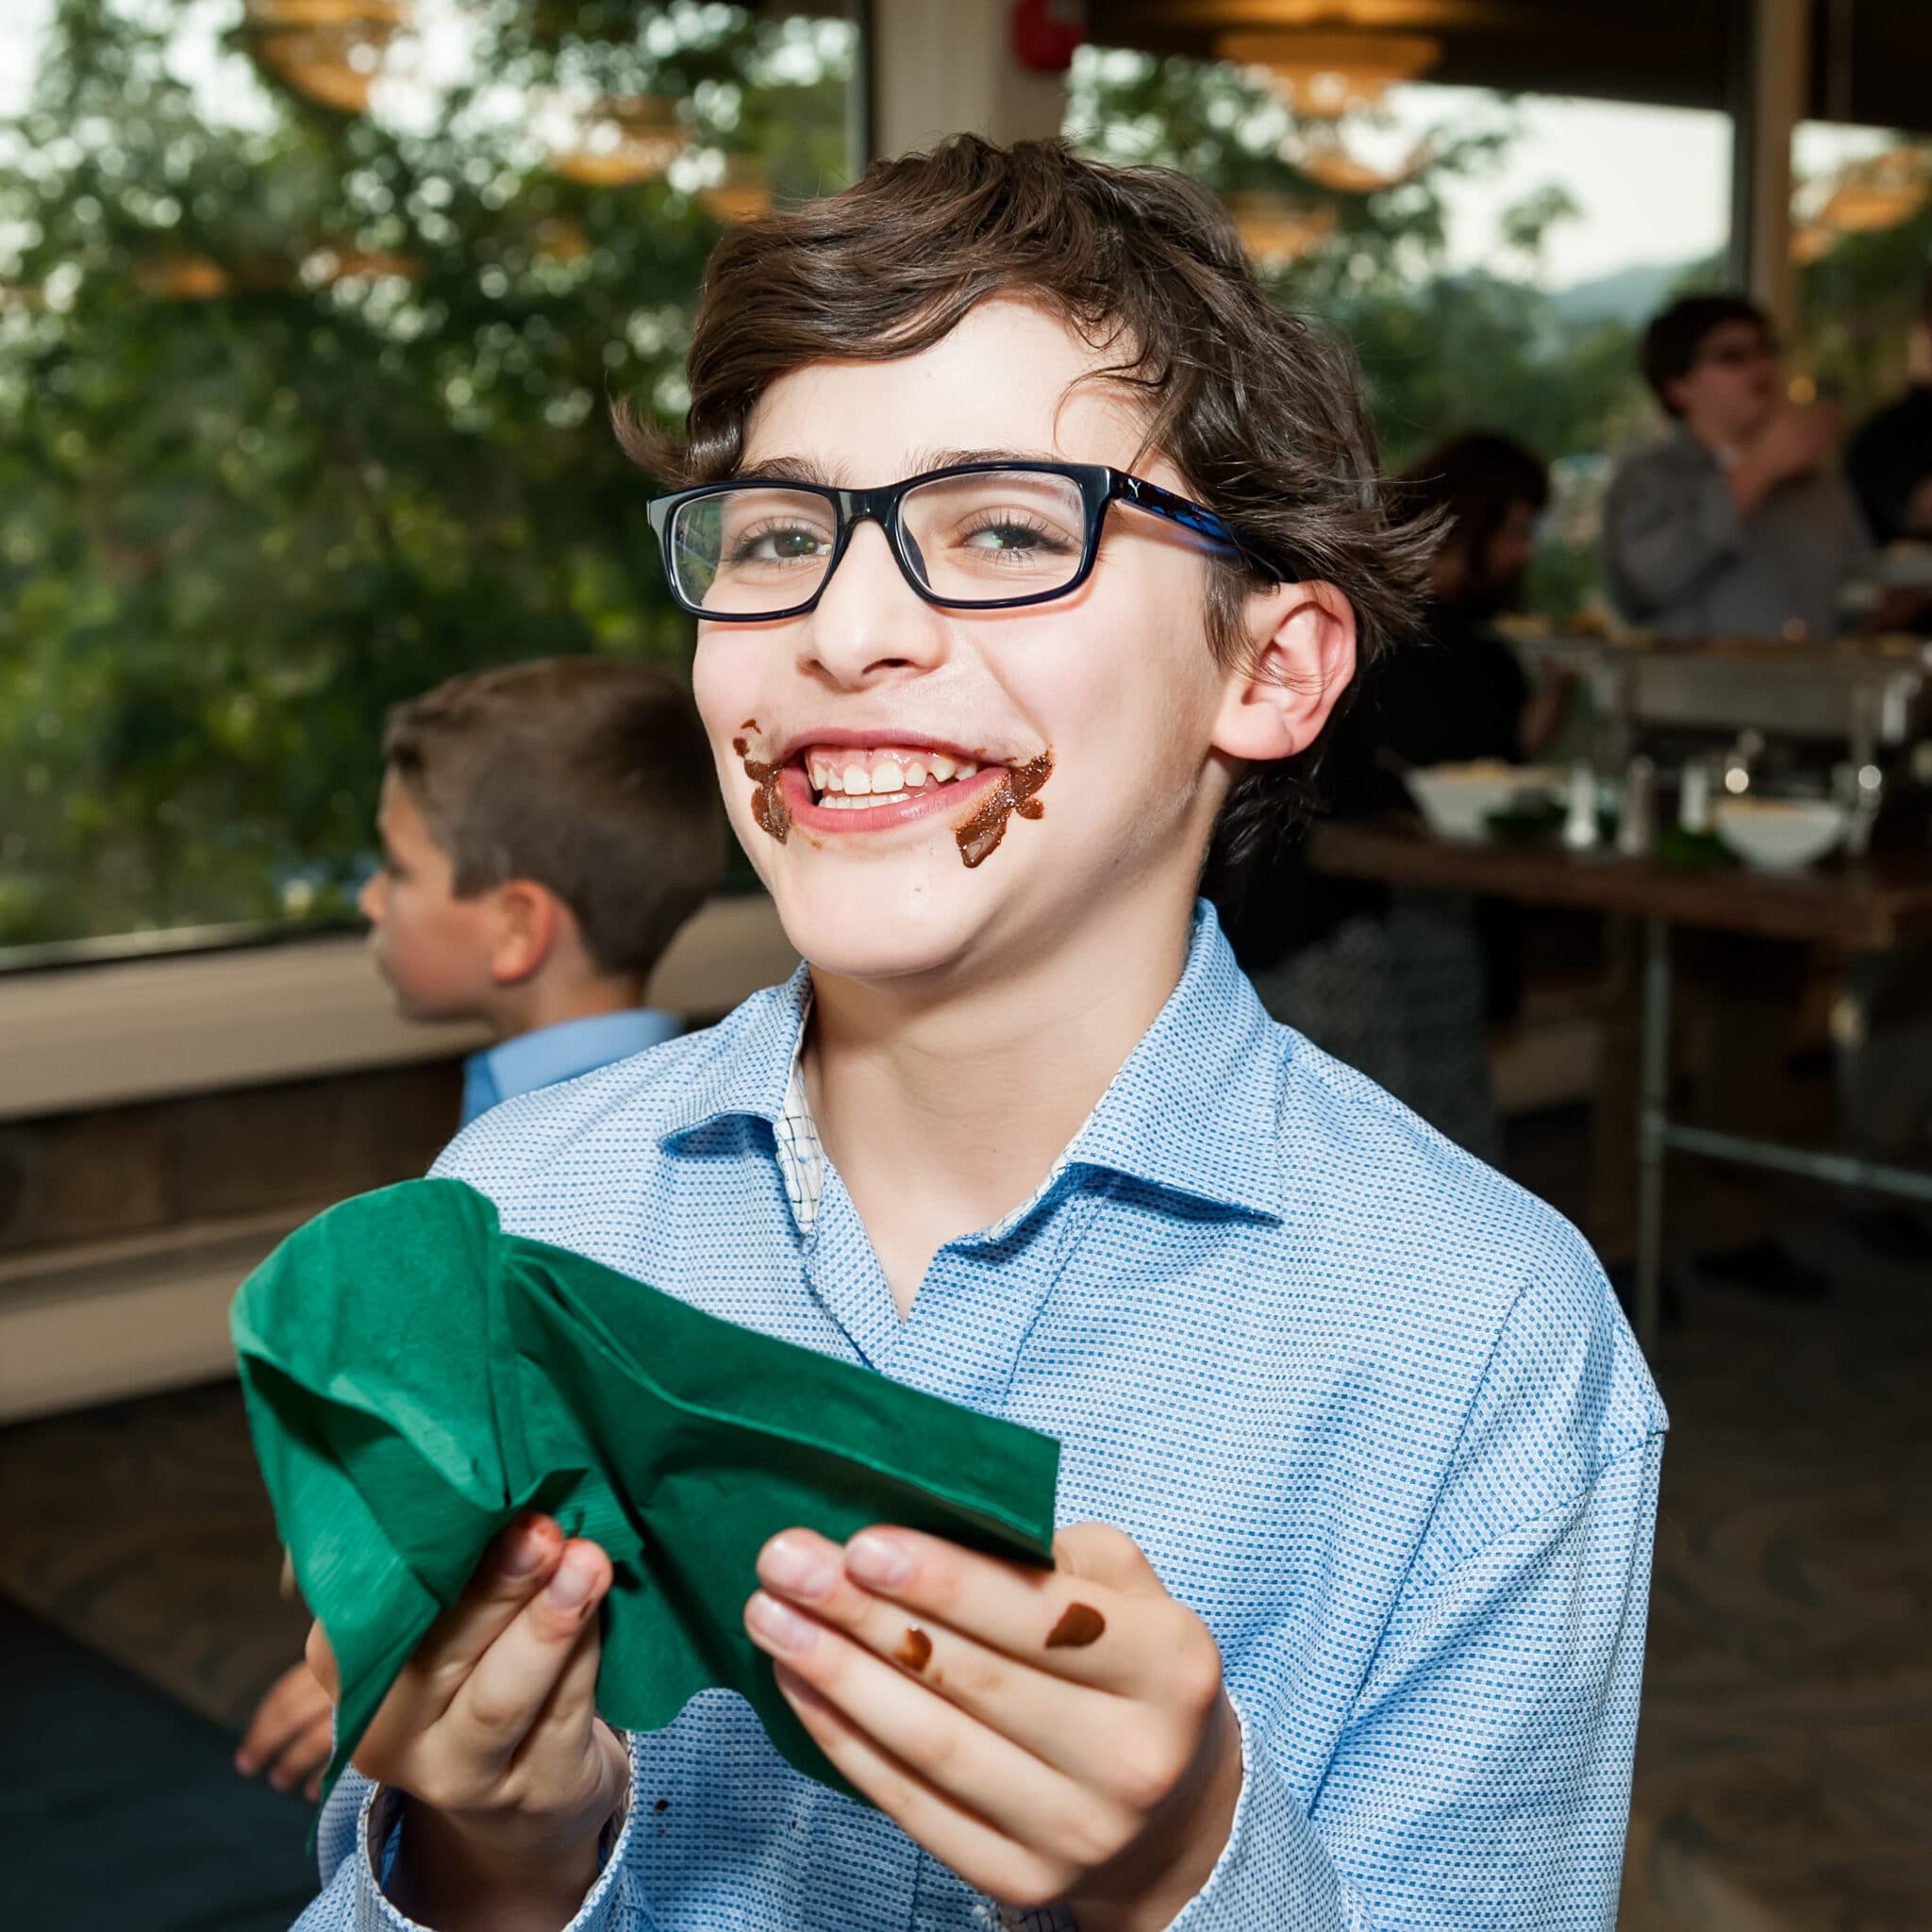 A young man uses a napkin to remove chocolate from his mouth after tasting decadent desserts.